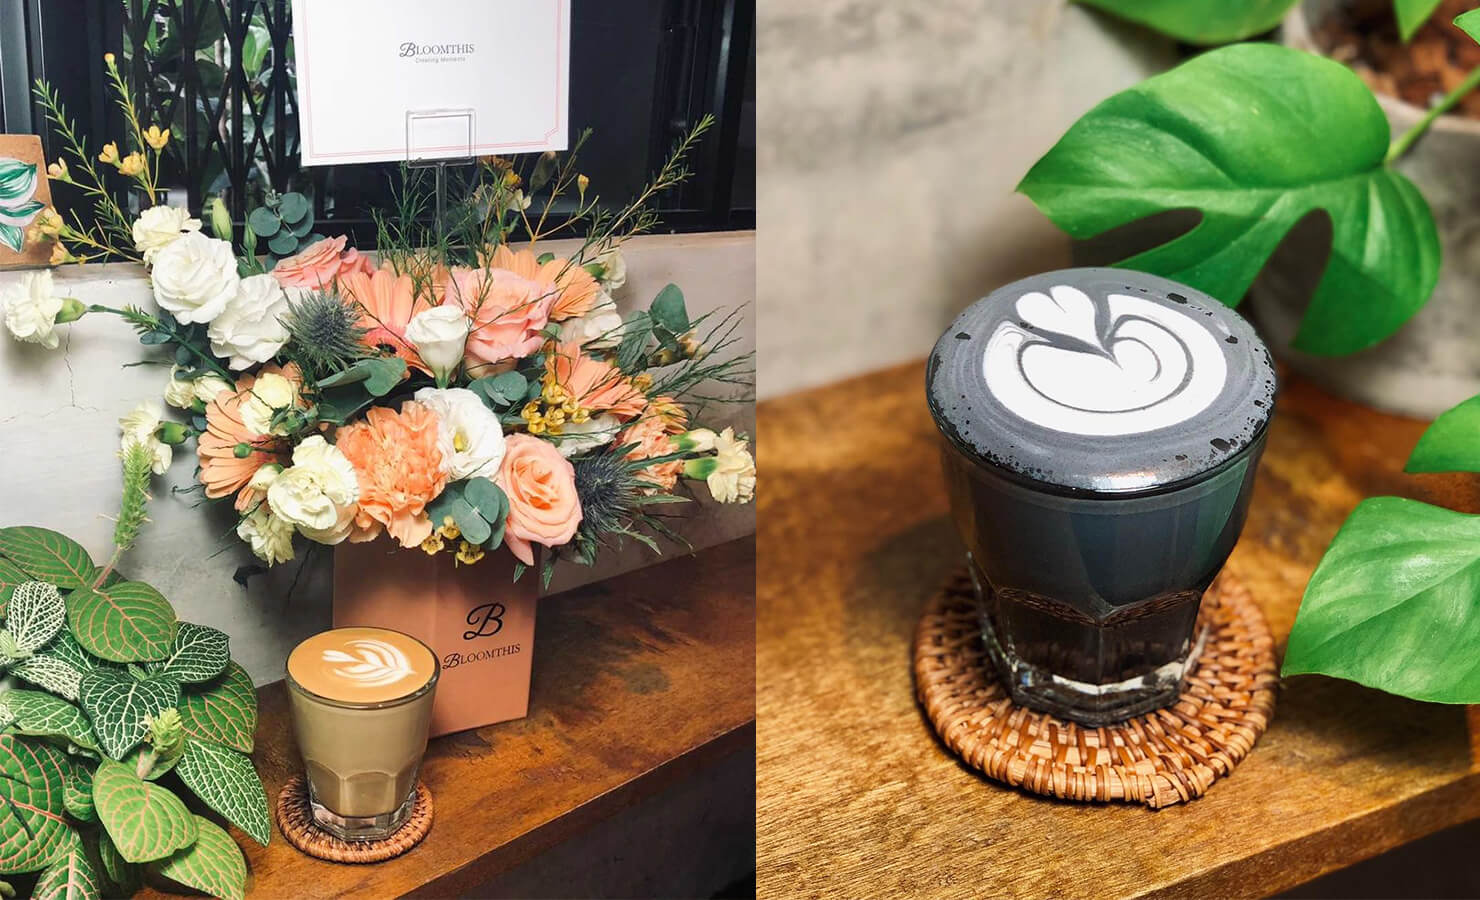 bloomthis-5-plant-flower-cafes-you-have-to-visit-06-sipping-corner-coffee-art